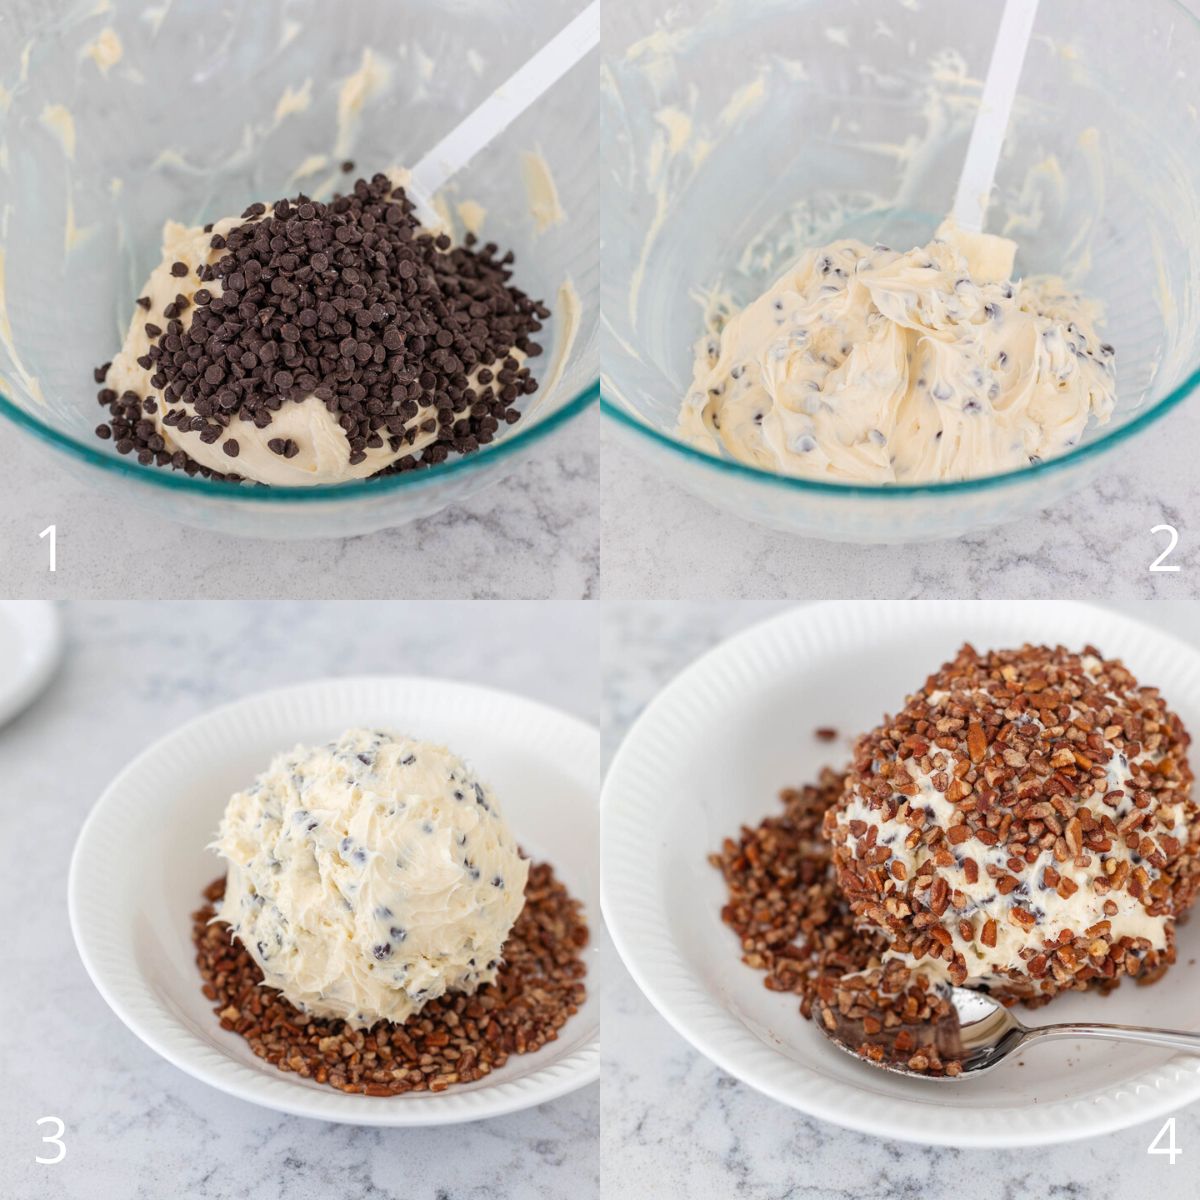 The step by step photos show how to shape the cheese ball and coat it in chopped pecans.